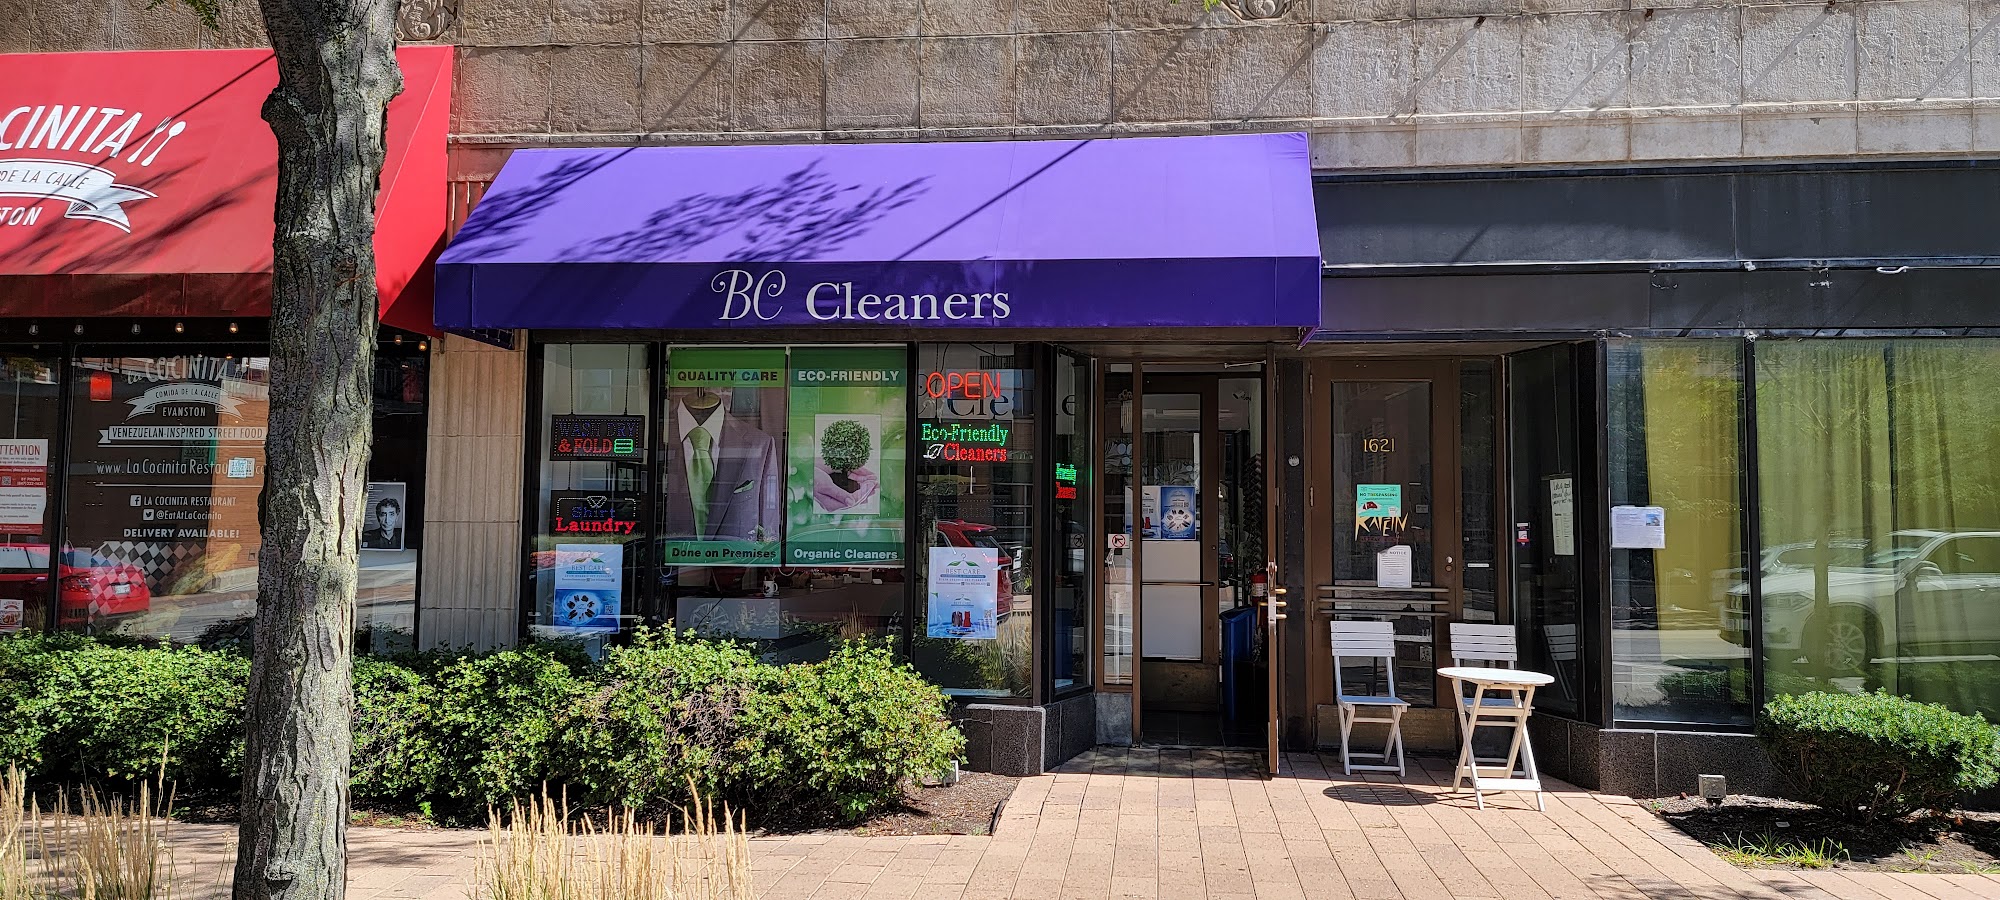 Best Care Cleaners & Alterations